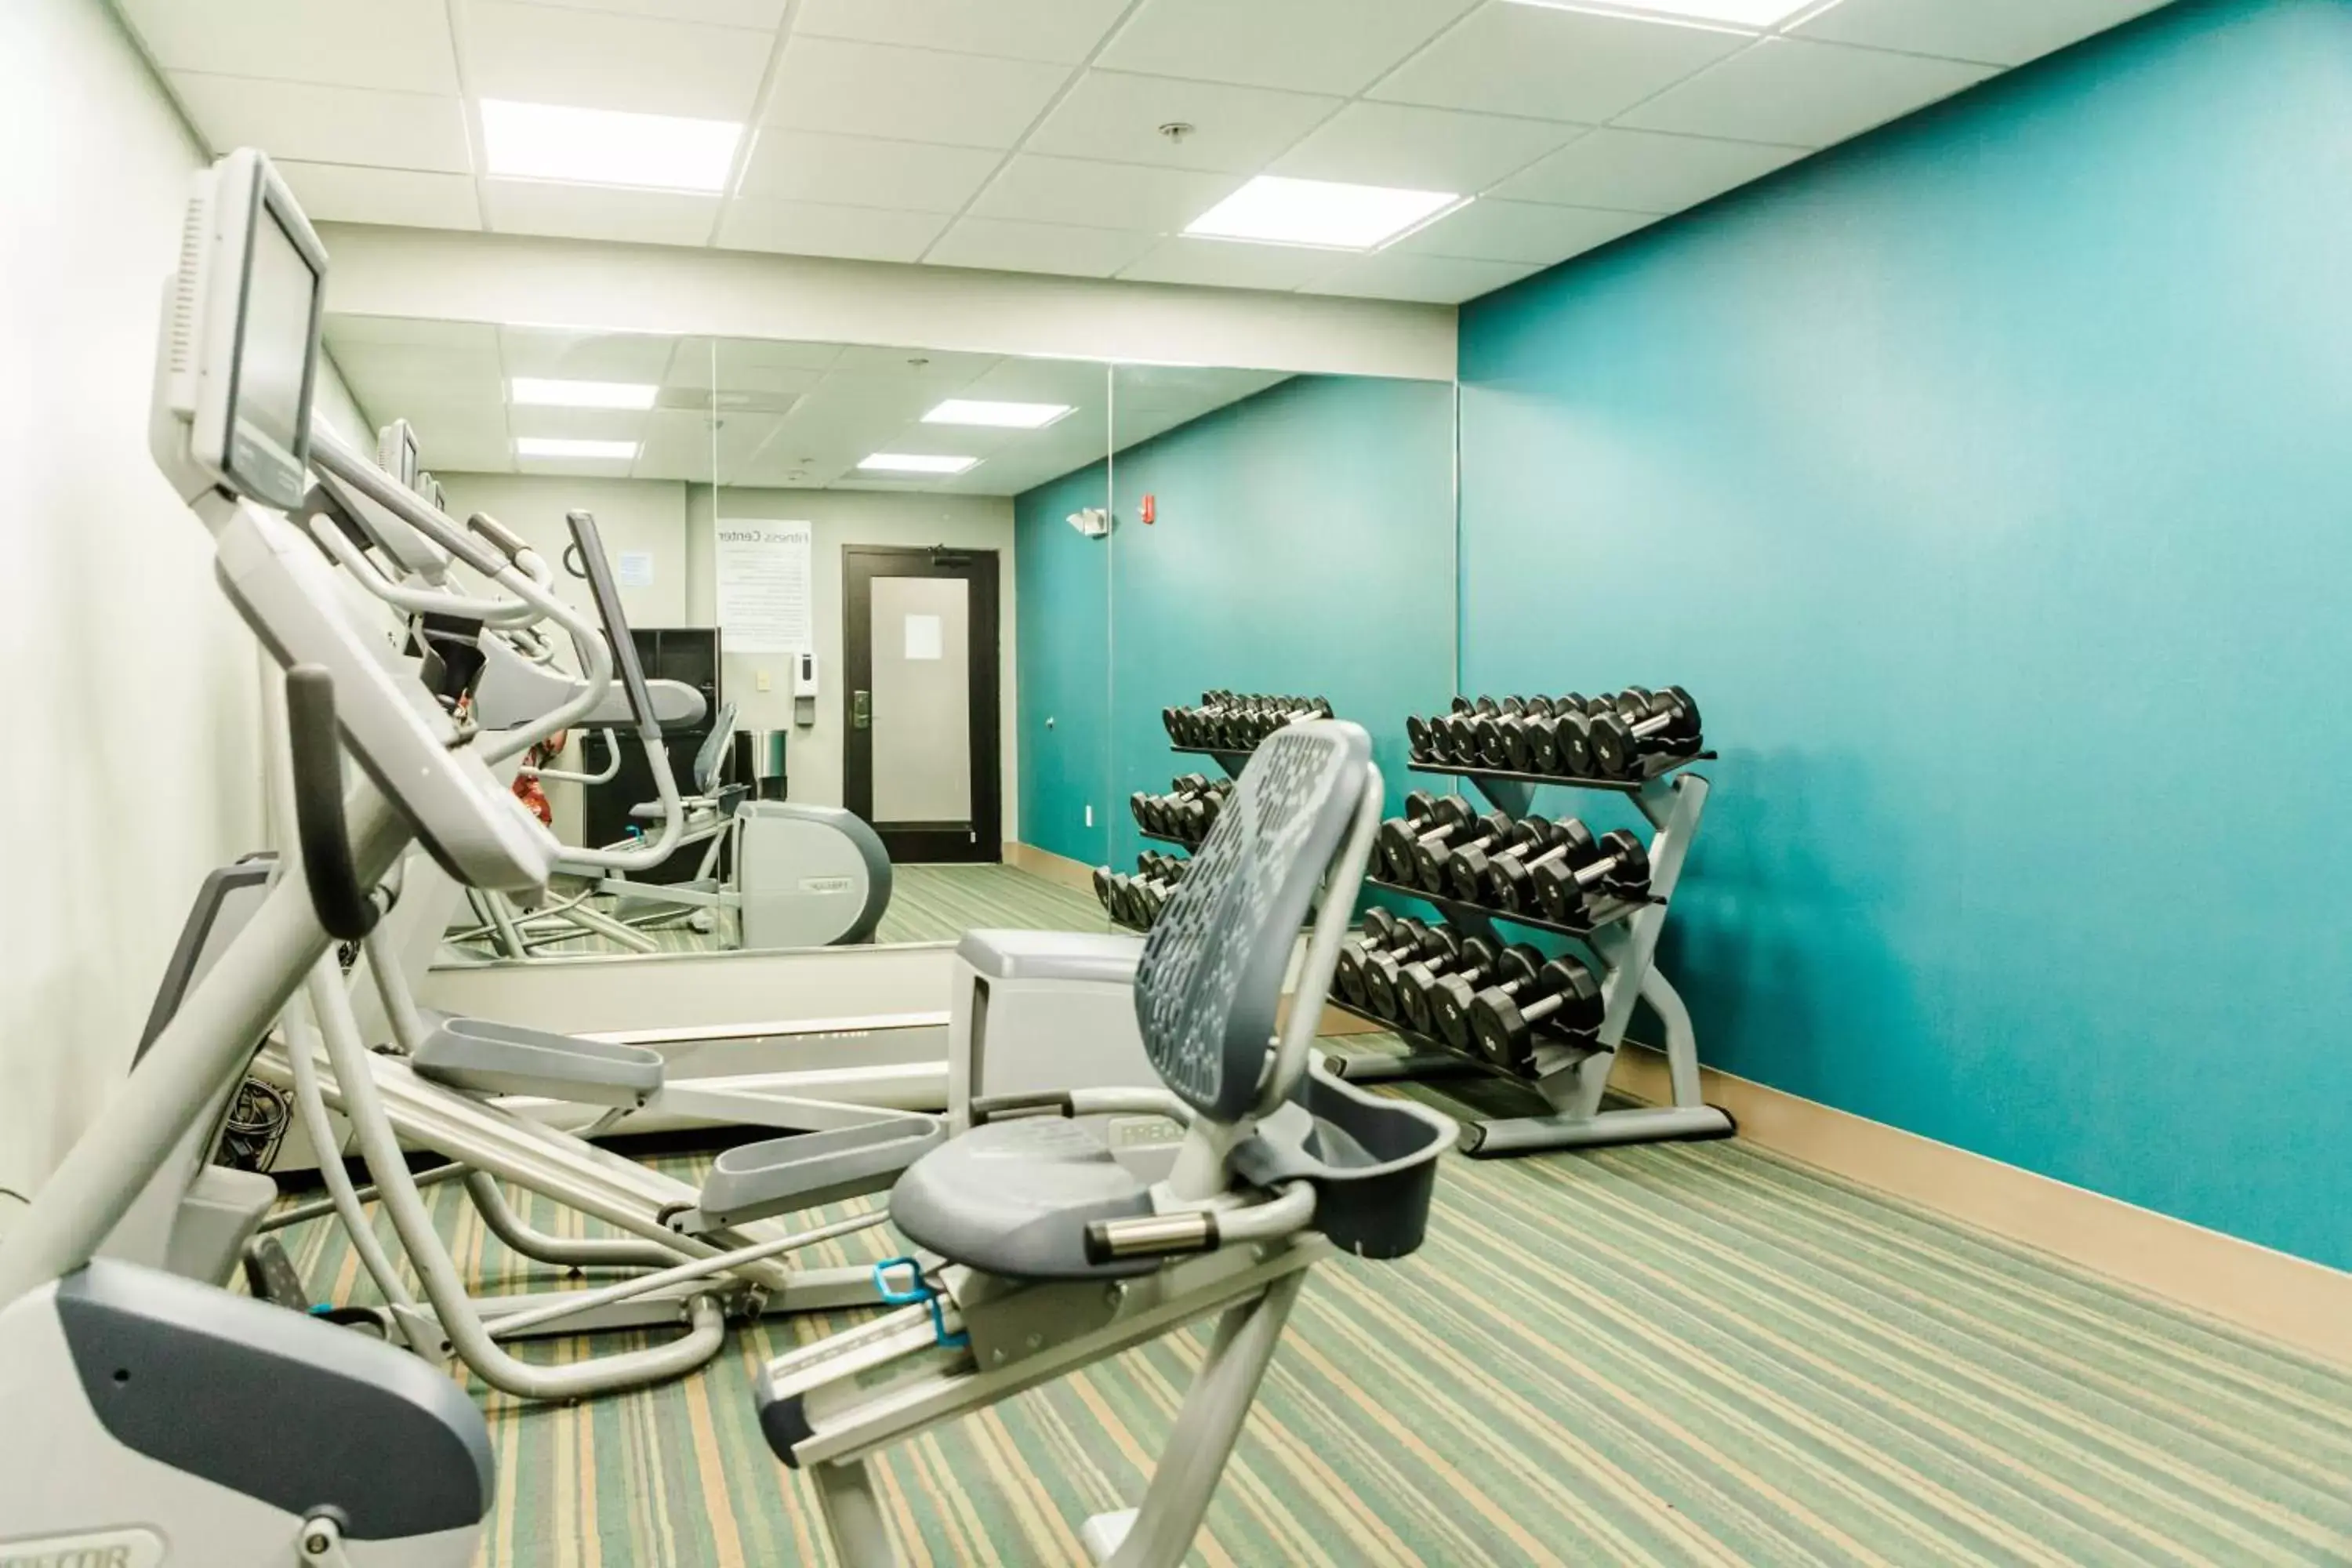 Fitness centre/facilities, Fitness Center/Facilities in Holiday Inn Express - Andalusia, an IHG Hotel